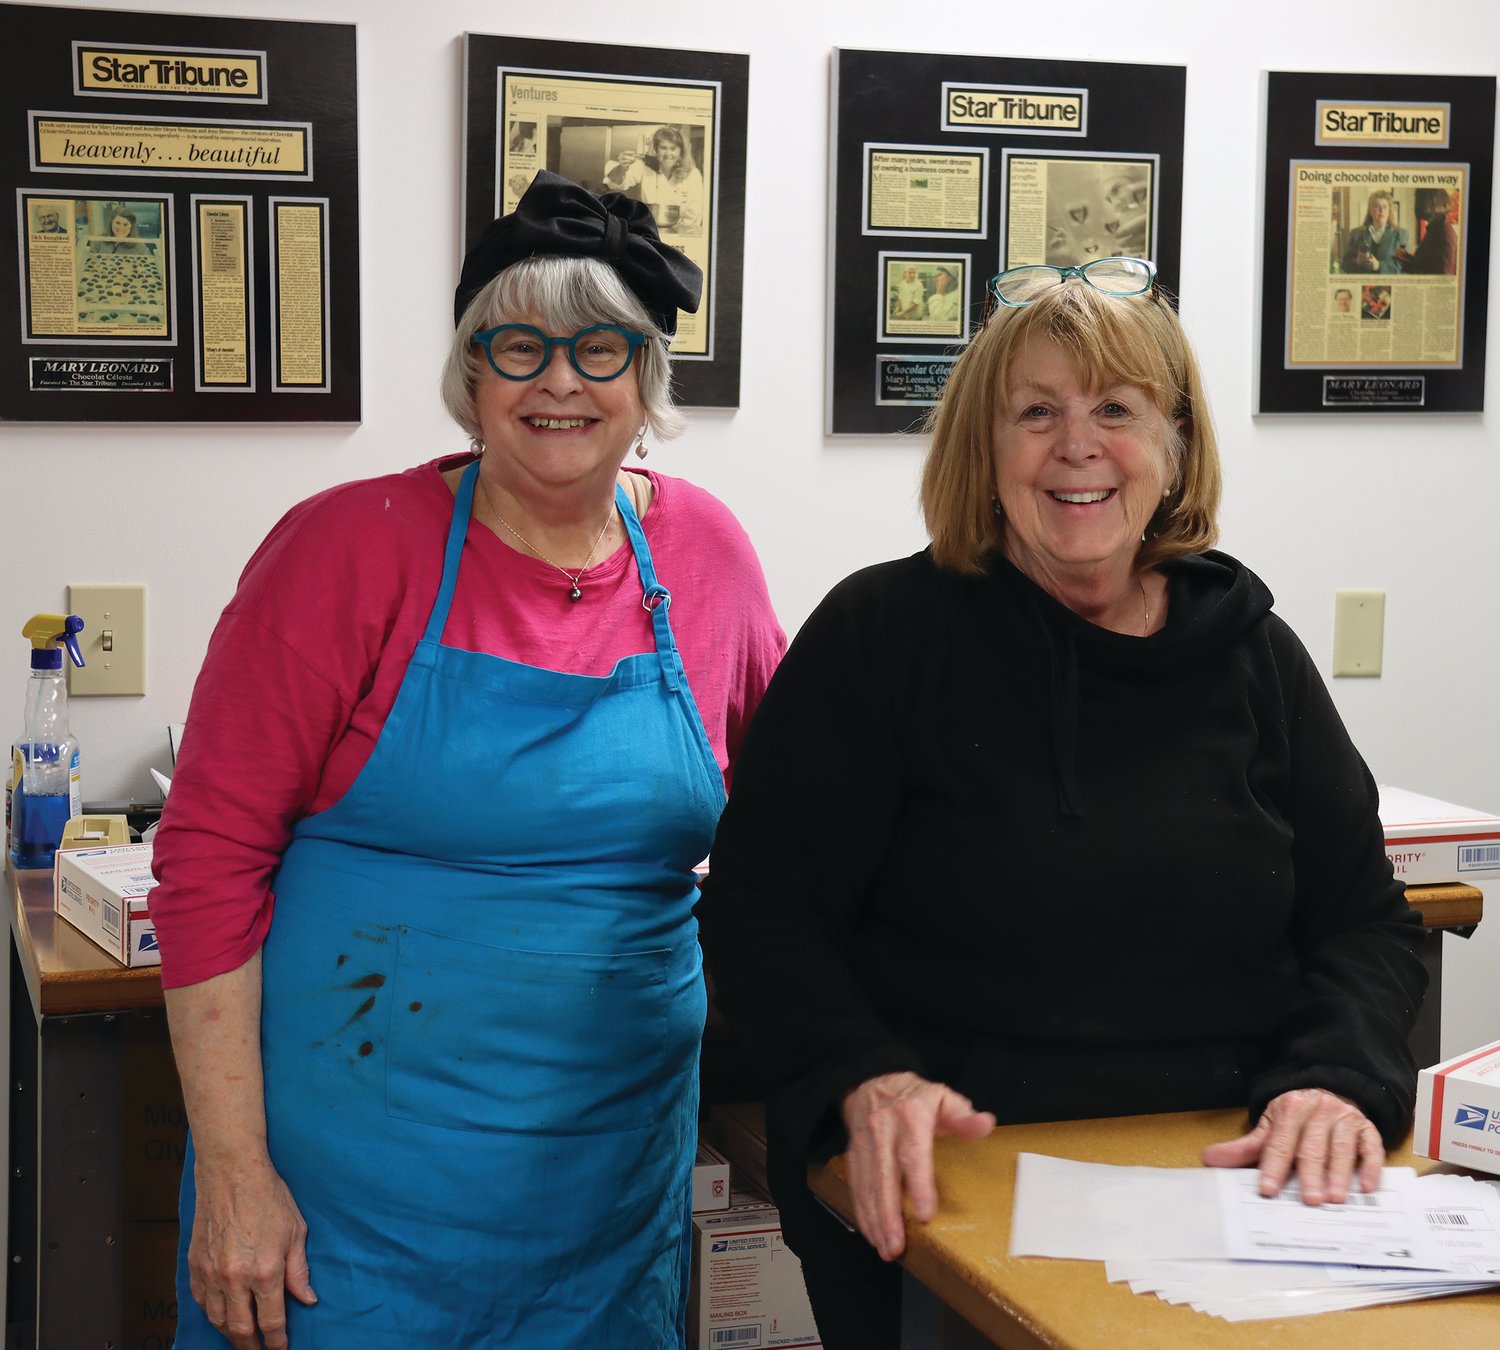 Chocolat Céleste owner Mary Leonard (left)  and worker Stephanie Drake met in chemistry class at Highland Park High School. Today, they work together making and shipping chocolates. (Photo by Tesha M. Christensen)